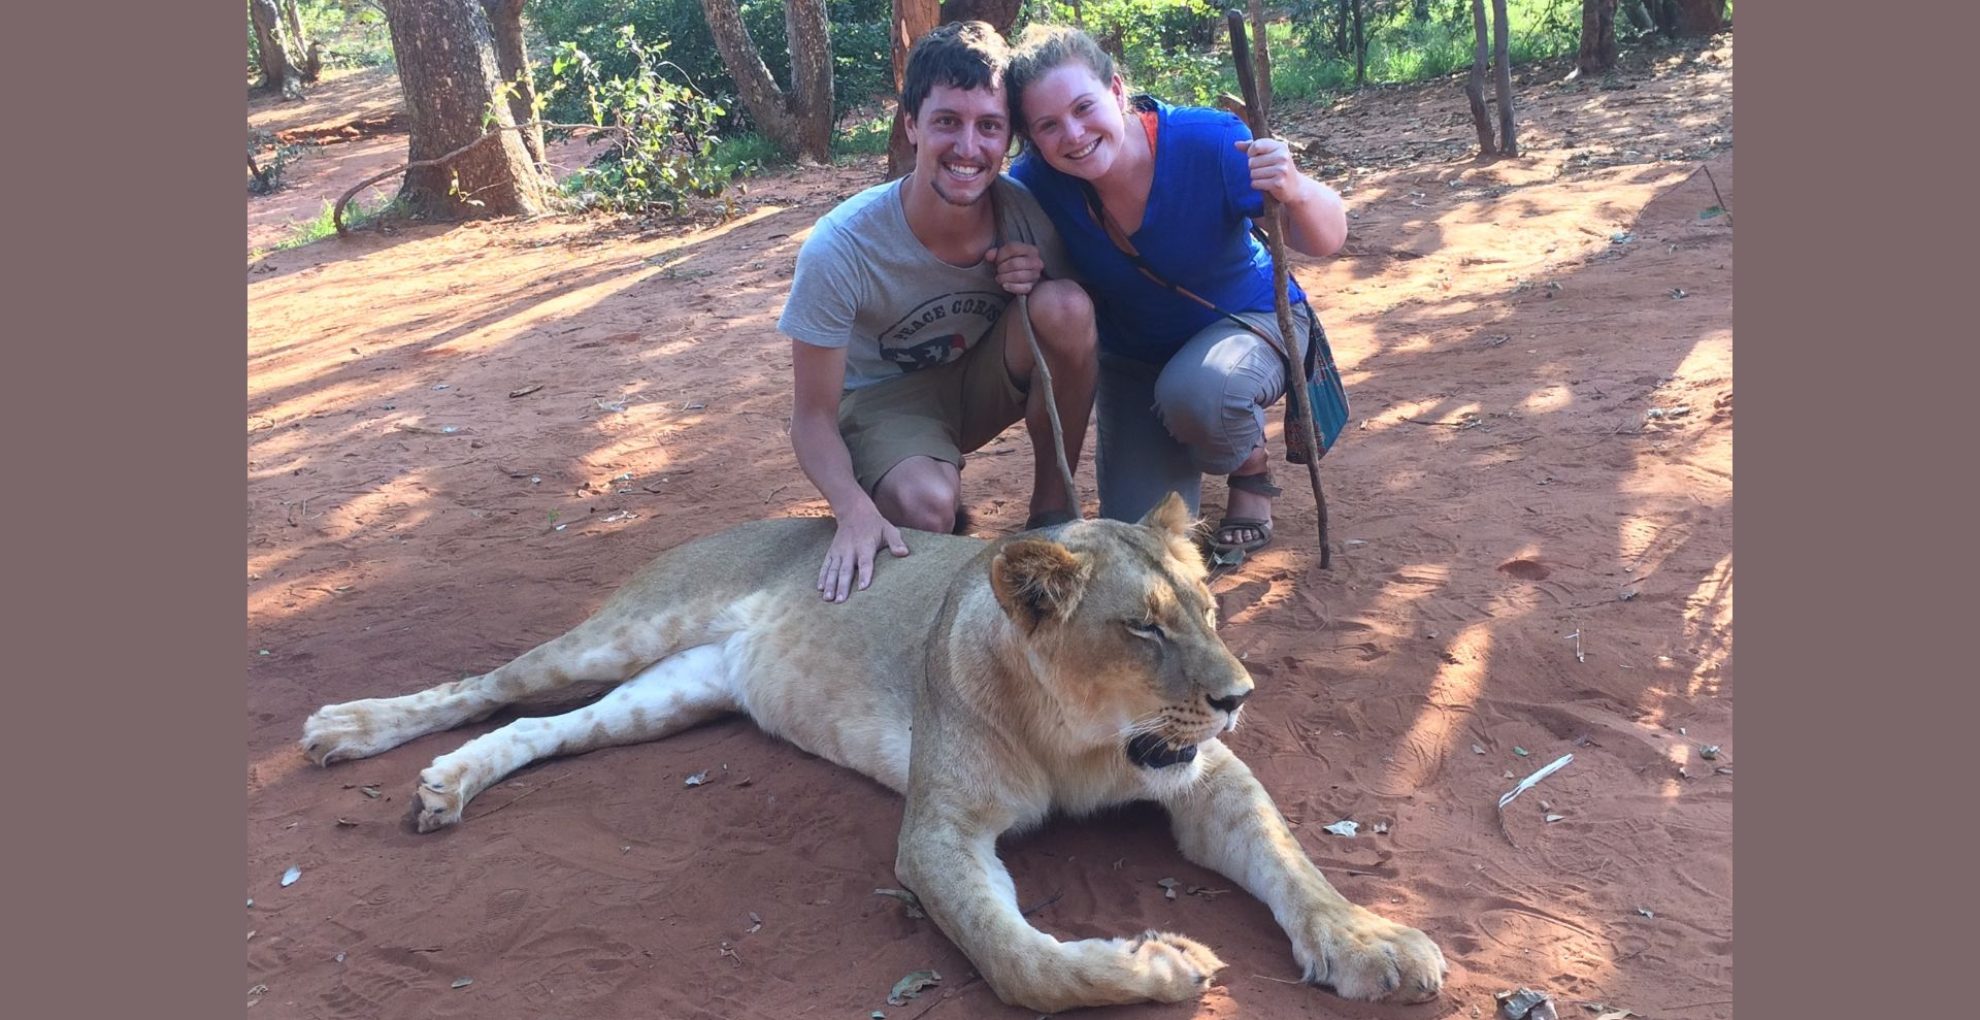 Kristin Gutierrez and her fiancé pictured with a lion in Solwezi, Zambia, where the couple met while volunteering with the Peace Corps. Credit: Kristin Gutierrez